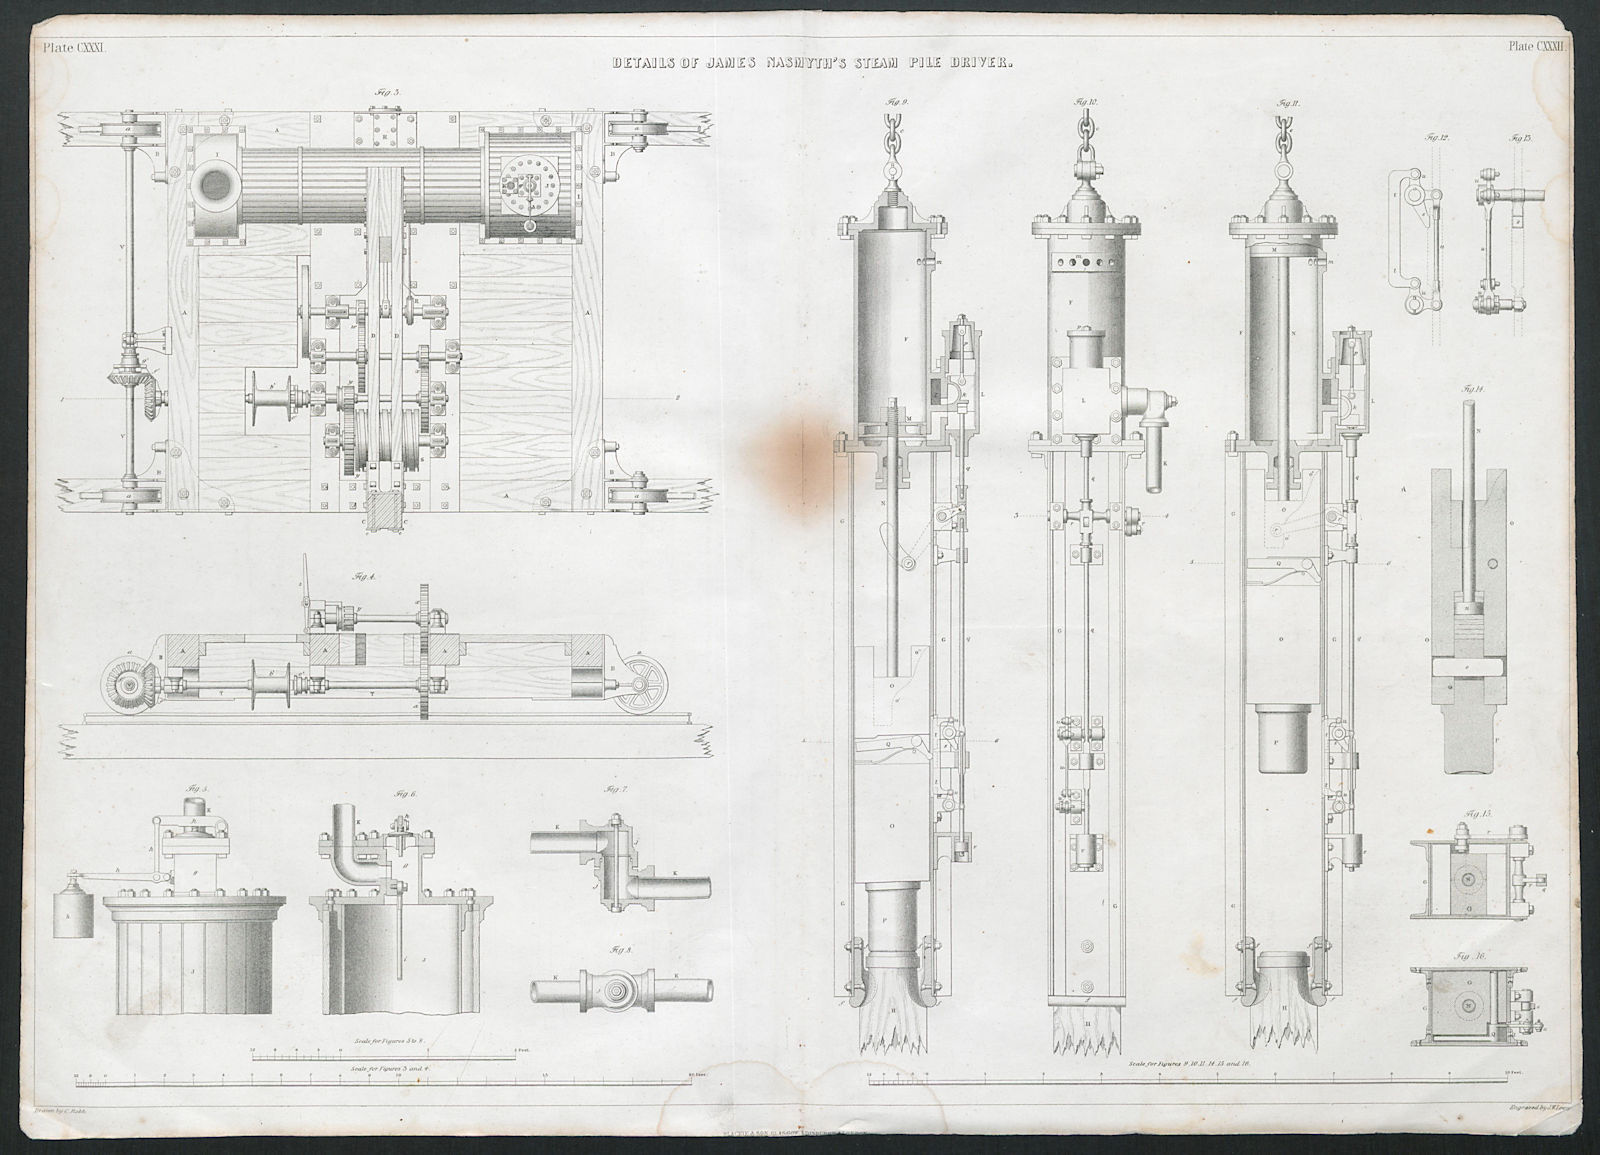 VICTORIAN ENGINEERING DRAWING James Nasmyth's steam pile driver details 1847